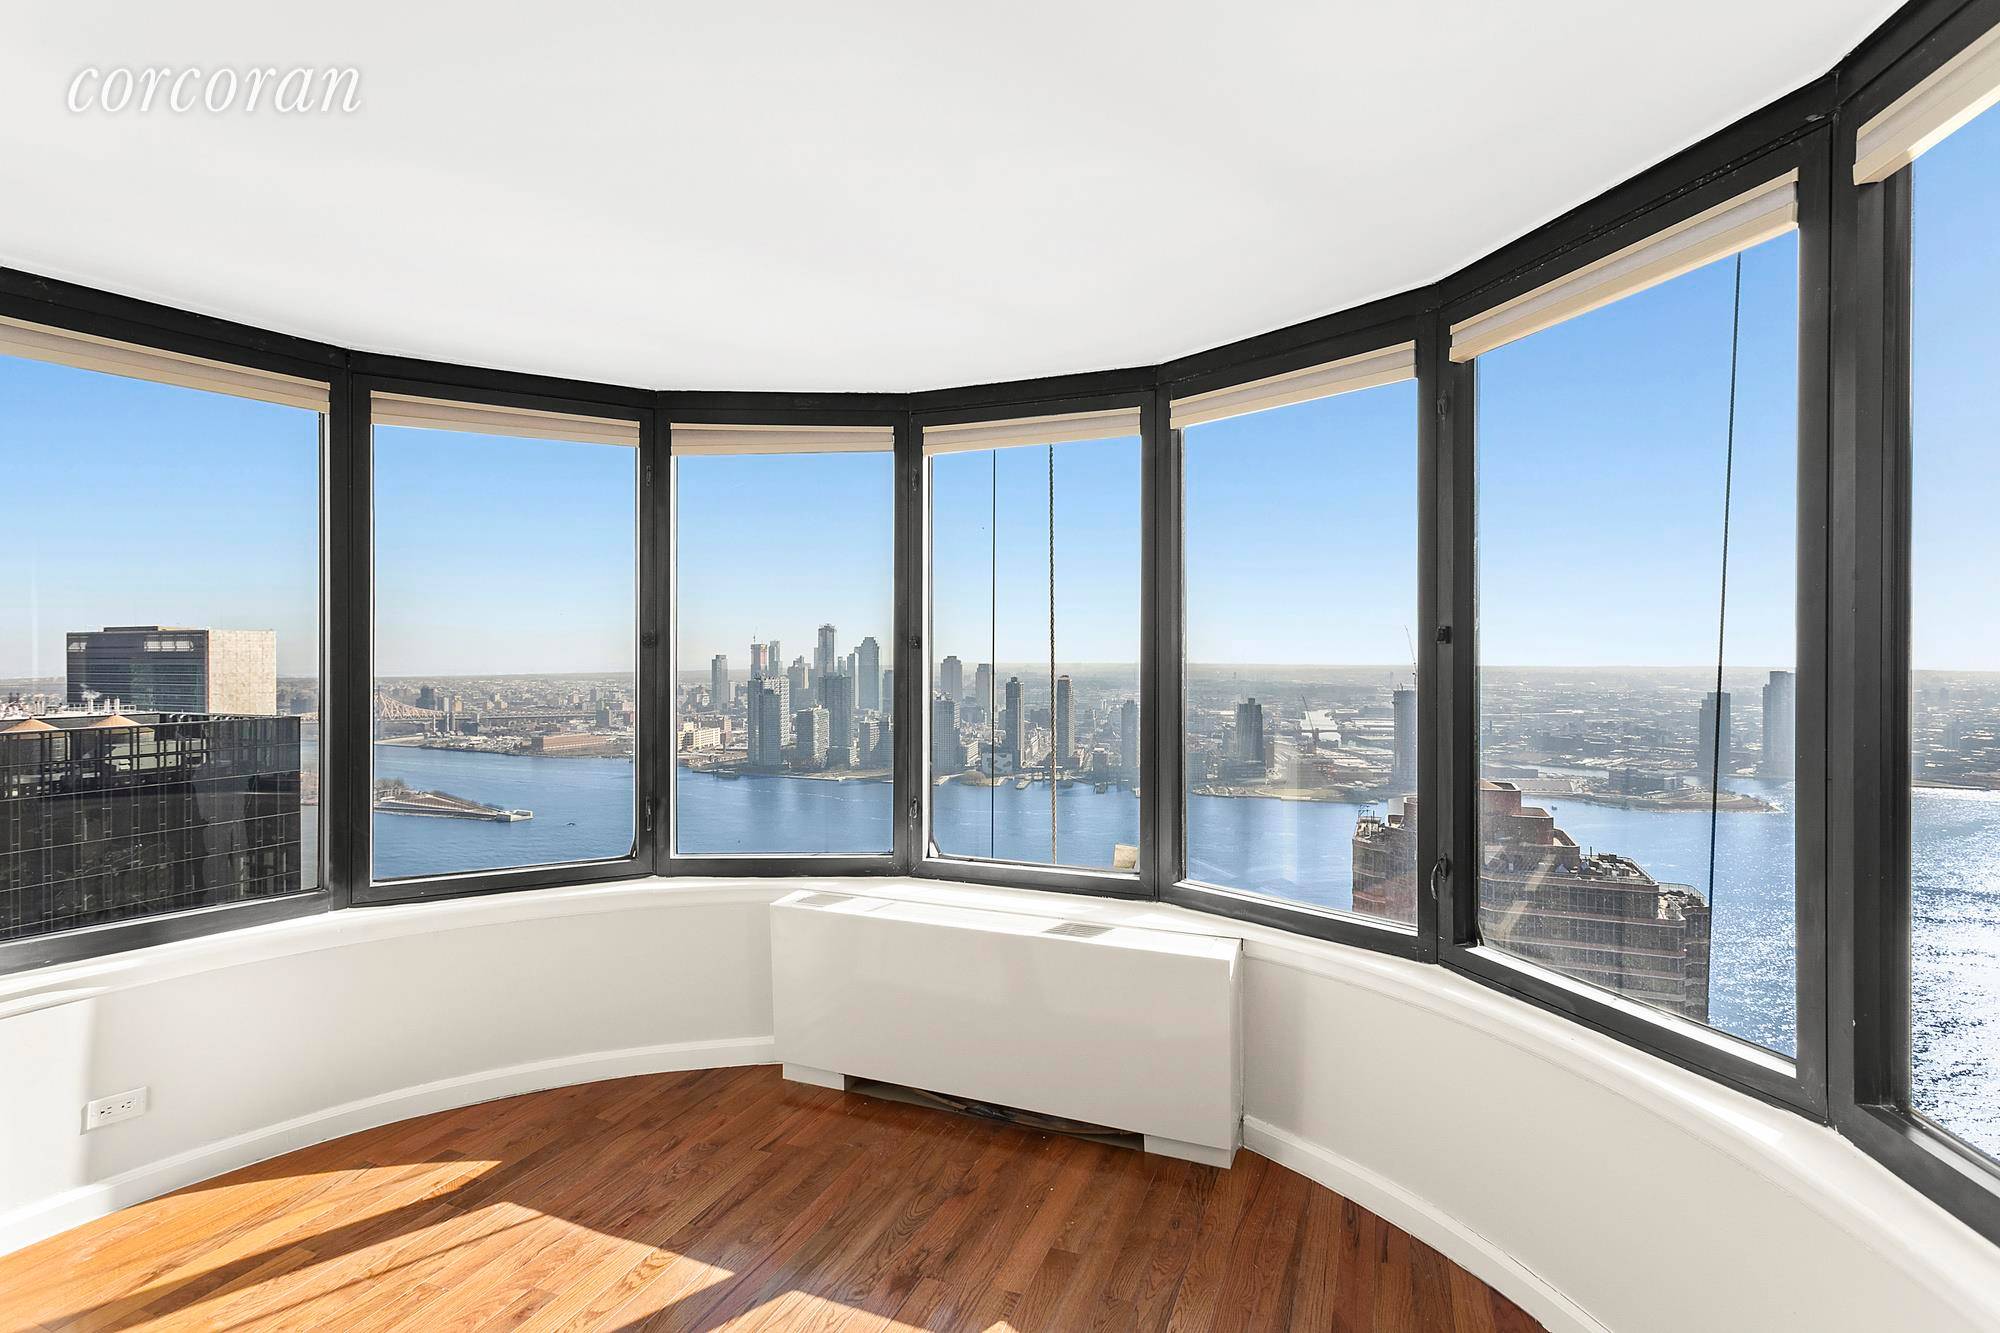 330 East 38th St Apt 56IJ New York, Ny 10016 Murray Hill Corinthian Condo, Spectacular views of East River, Chrysler Building, Waldorf Astoria, Bloomberg building from this 3 Bedroom, 3 ...